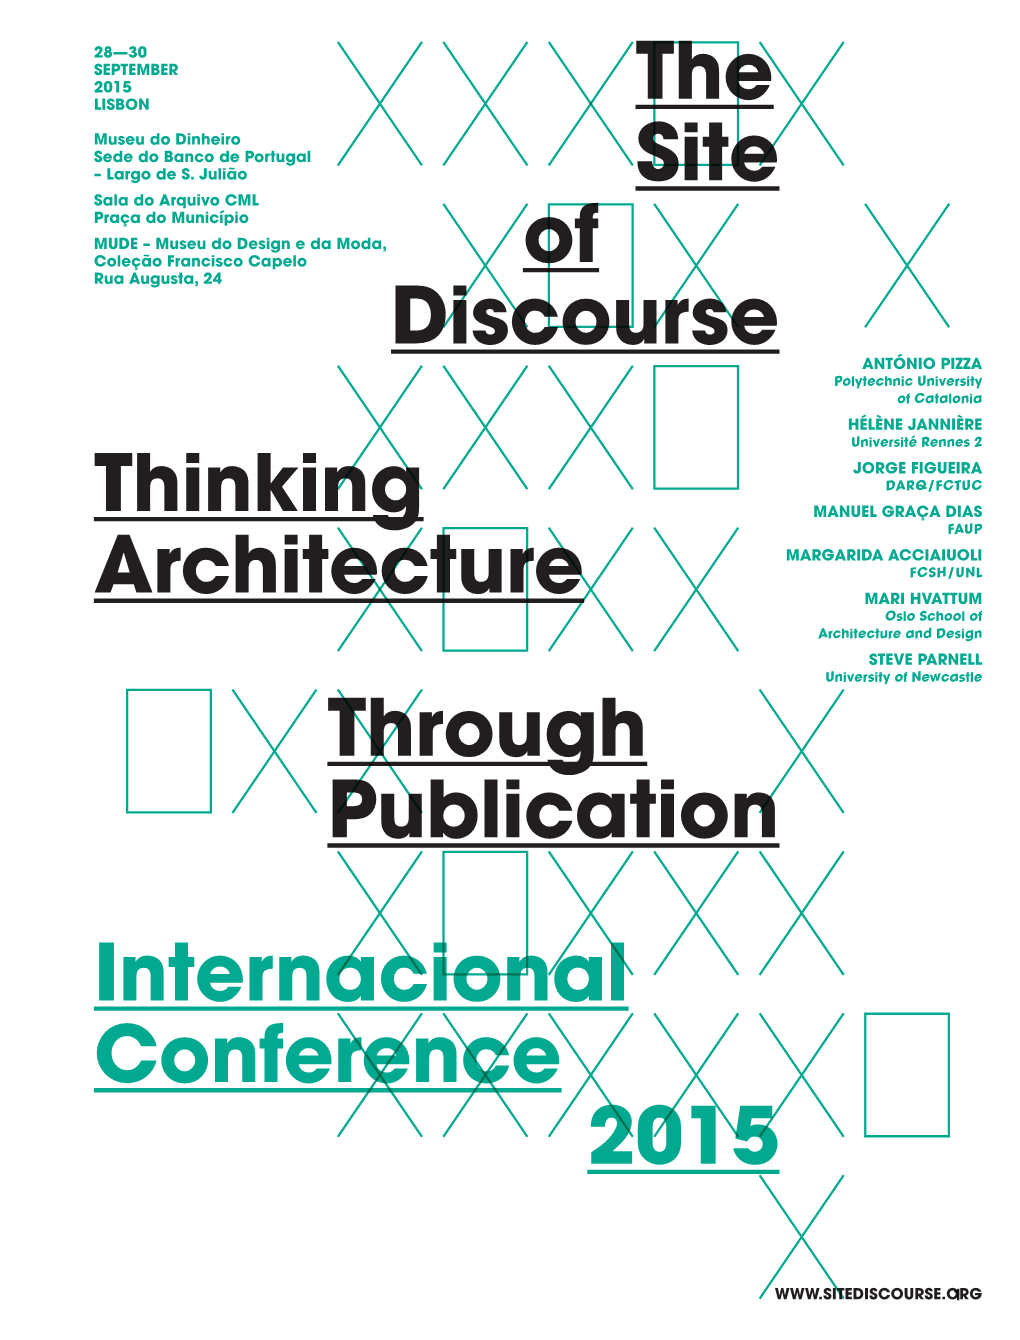 Thinking Publication Architecture Through the of Site Discourse